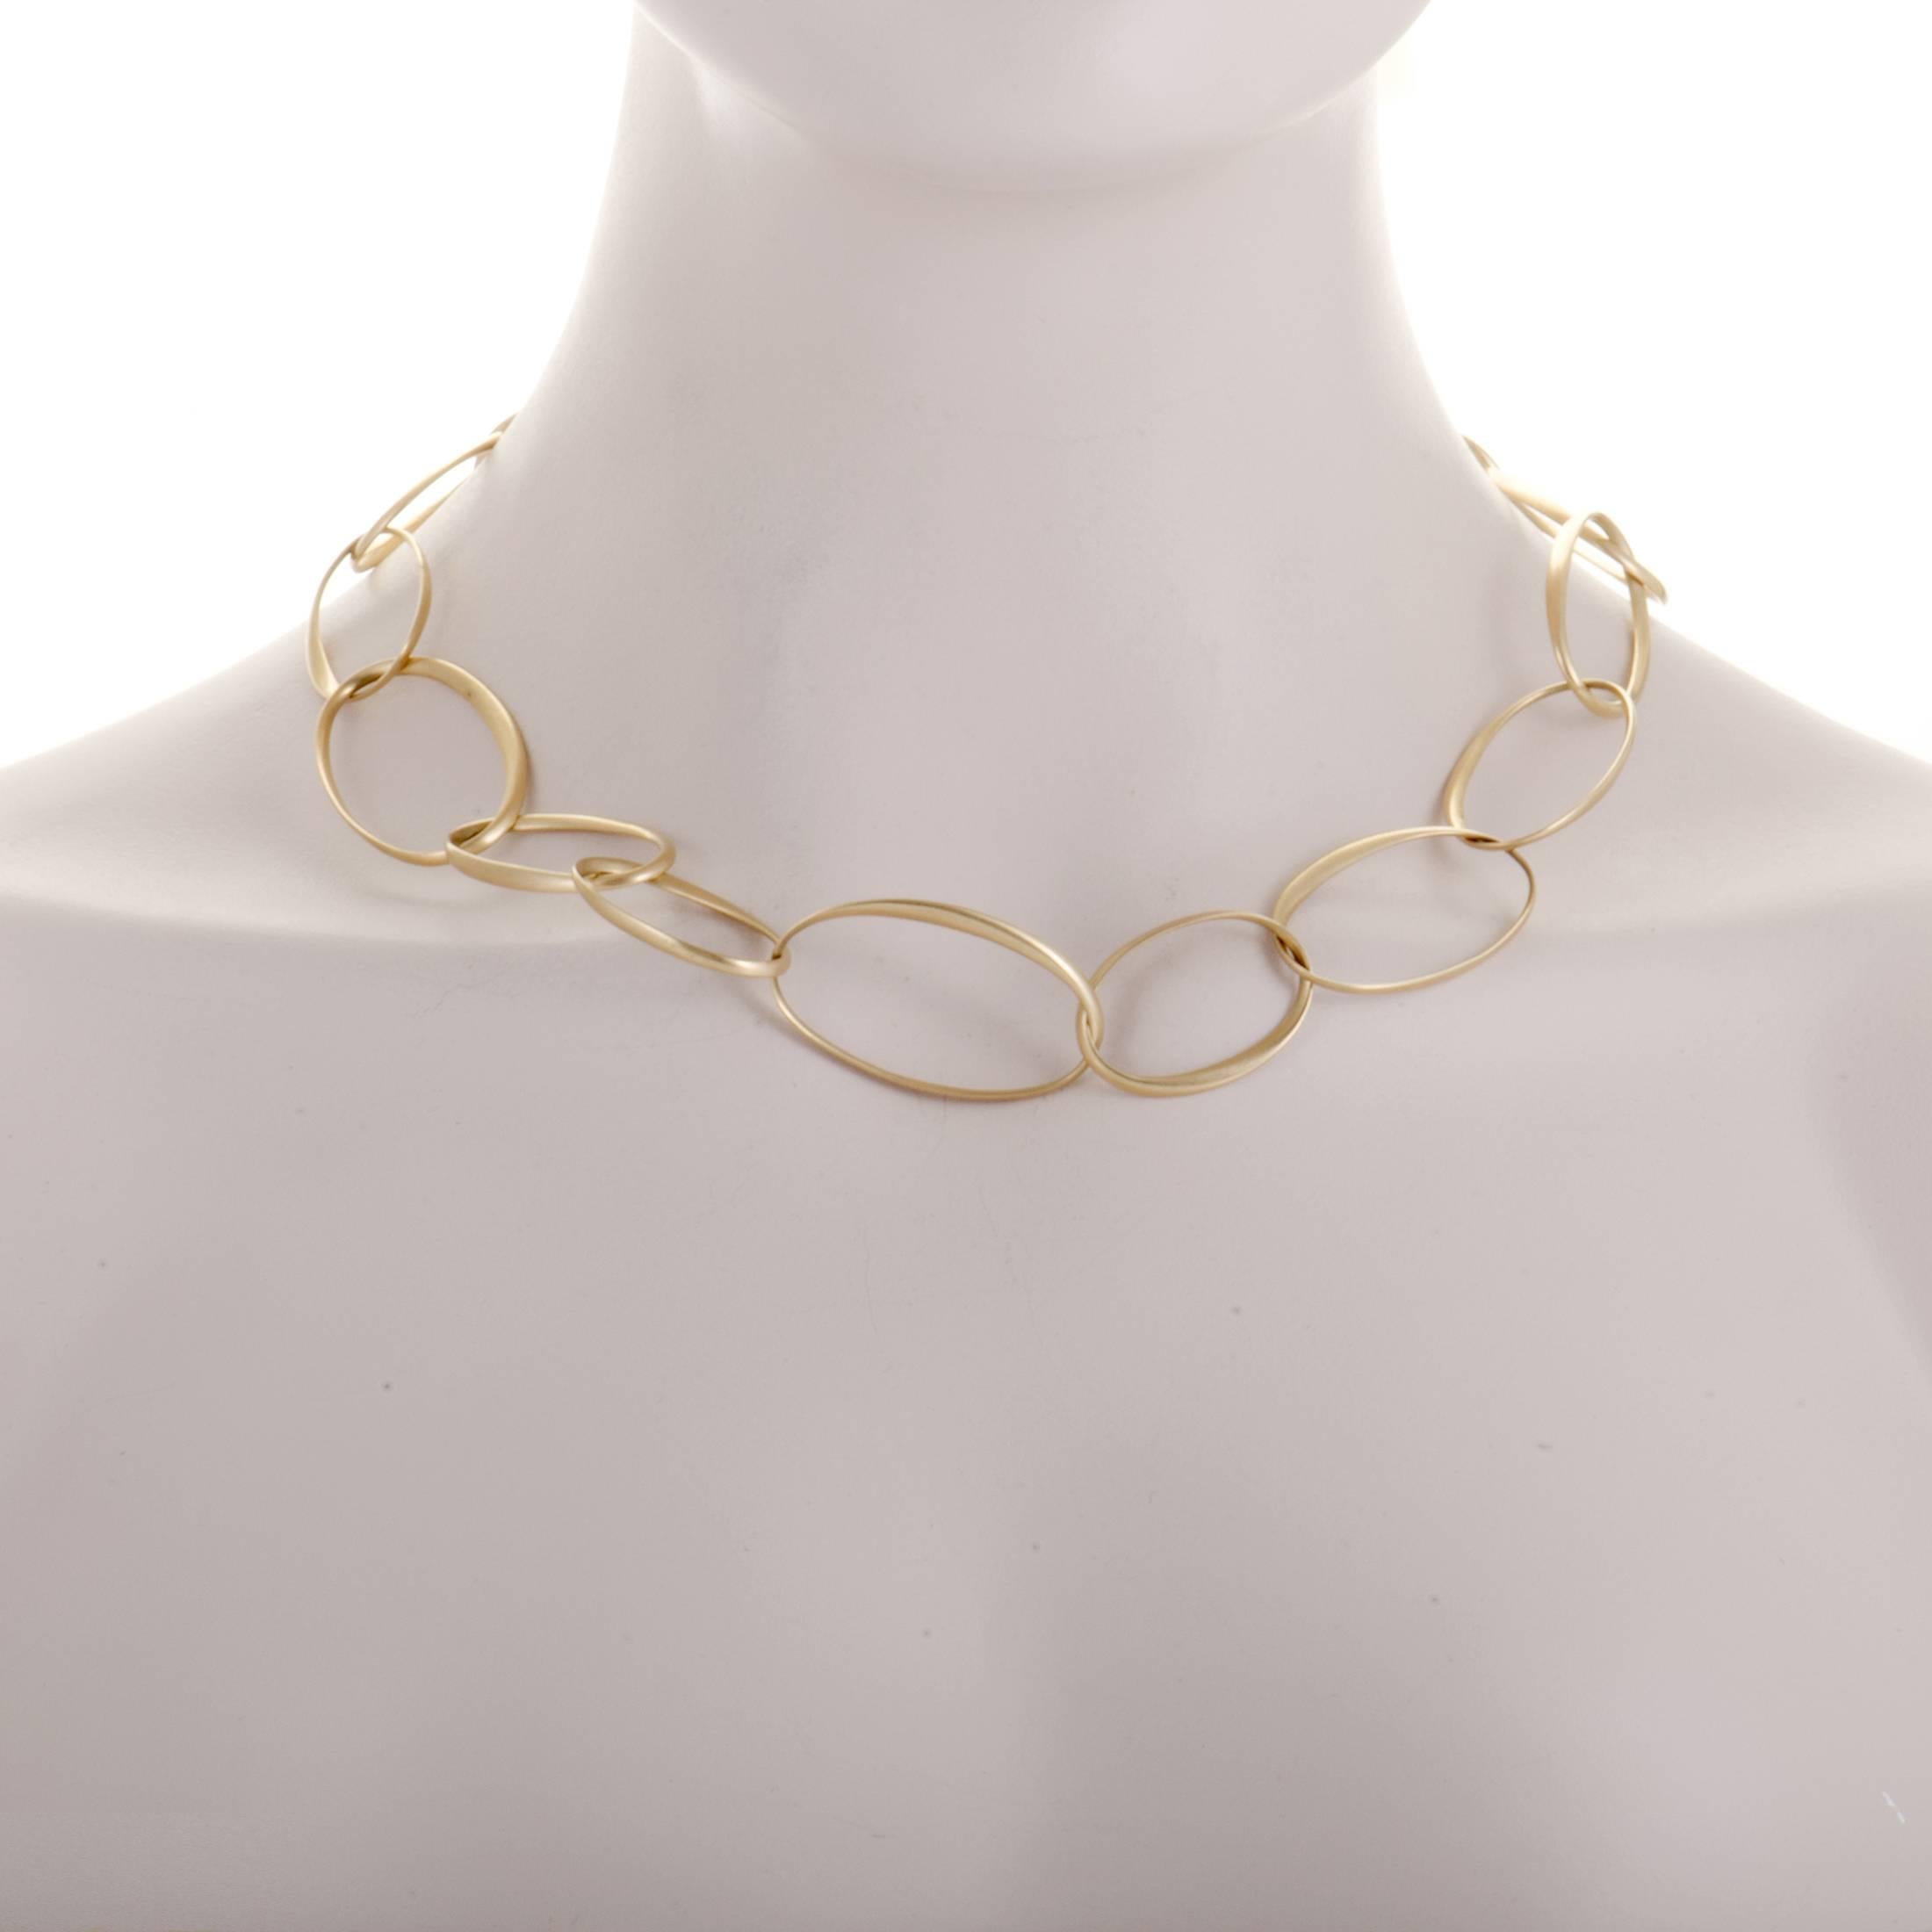 Astounding simplicity and delightfully graceful lines of this enchanting necklace from the Victoria collection by Pomellato create a magnificent sight while the intrinsic radiance of 18K rose gold is brought out brilliantly through the immaculate